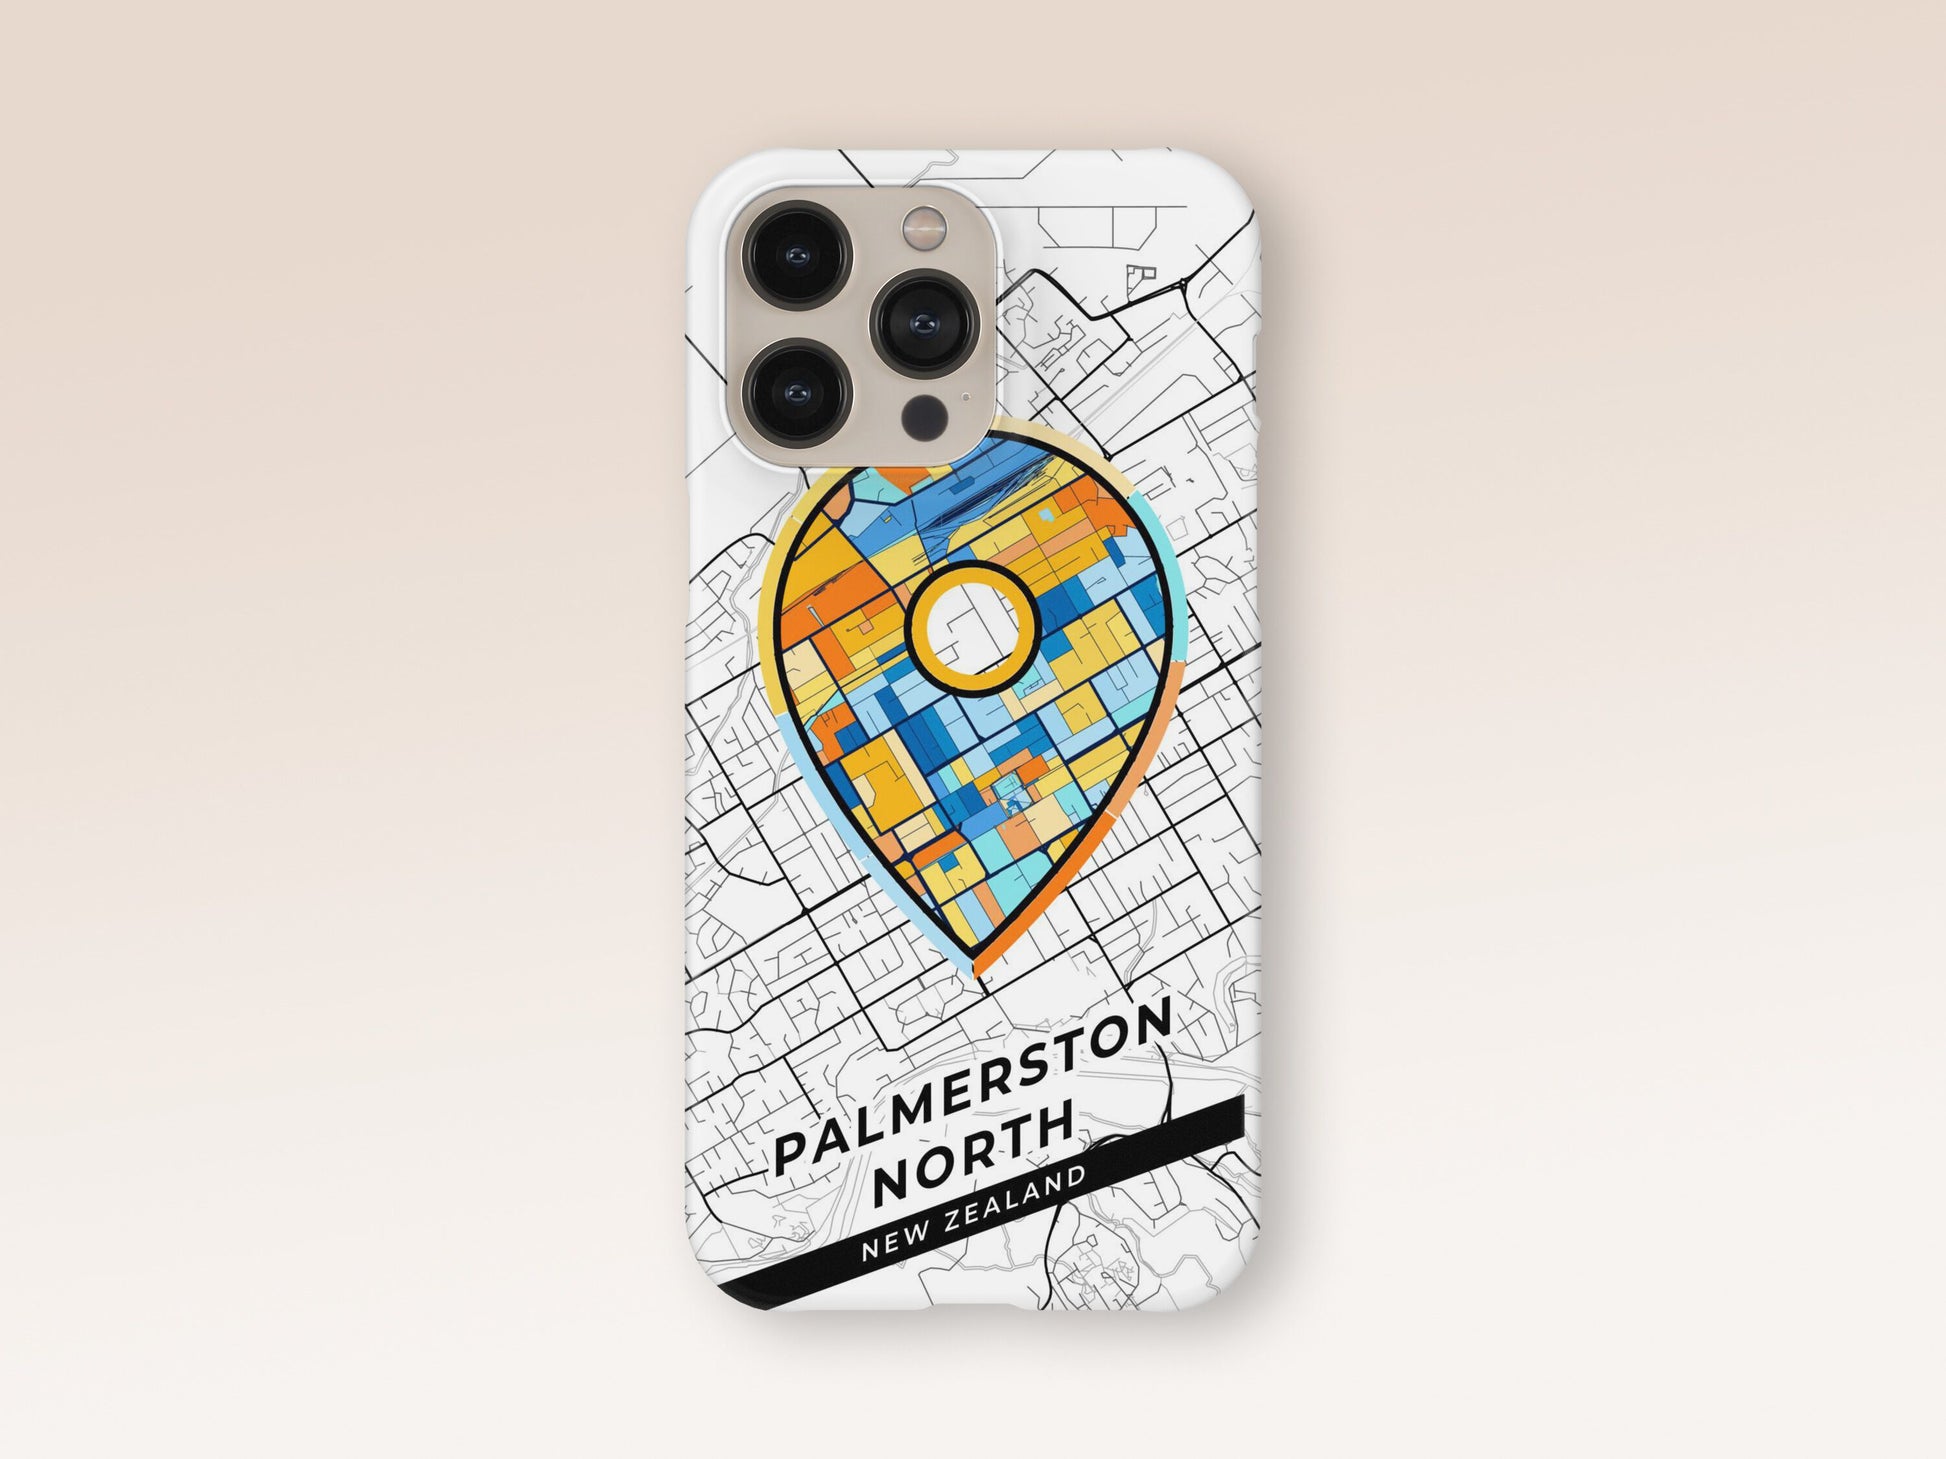 Palmerston North New Zealand slim phone case with colorful icon 1